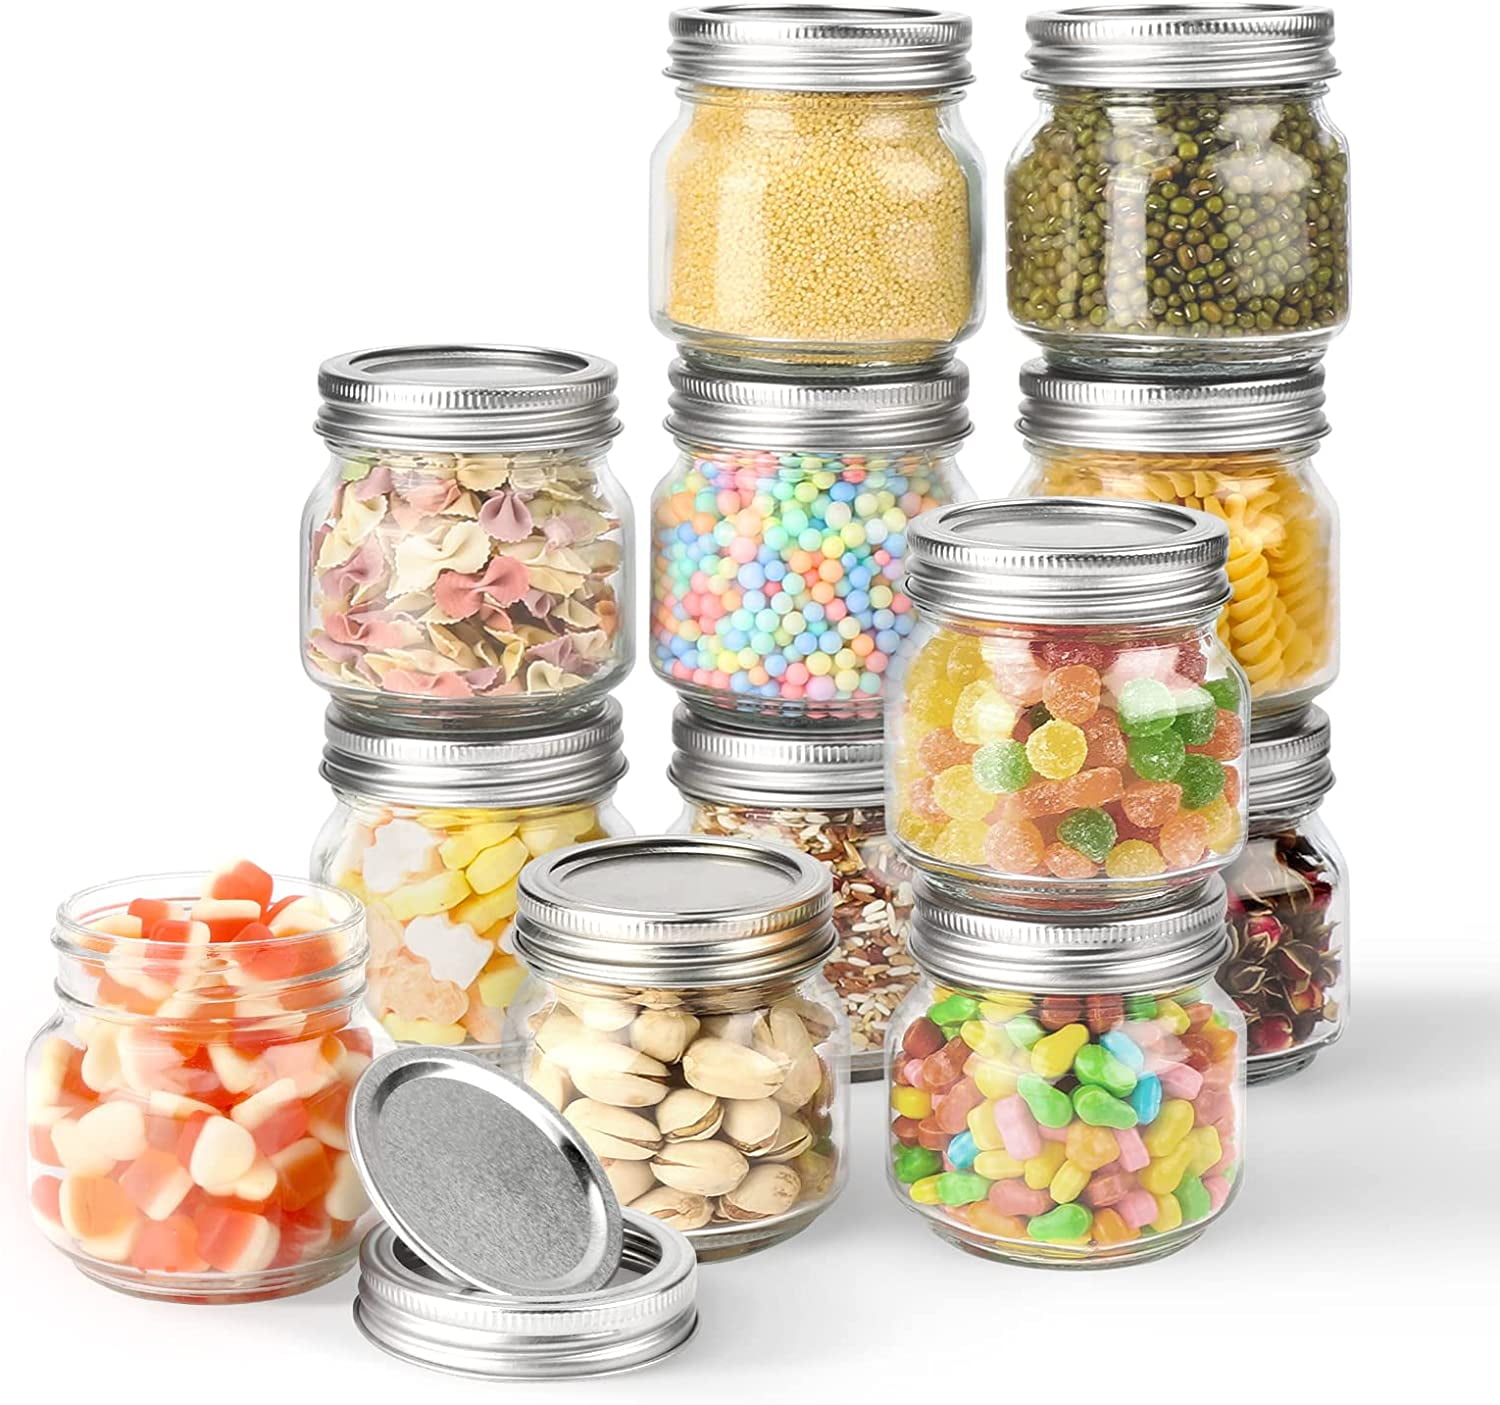 12 Pack 8oz Thick Glass Jars with Metal & Plastic Lids - Clear Round  Containers for Food Storage, Canning, Spices, Liquids - Dishwasher Safe